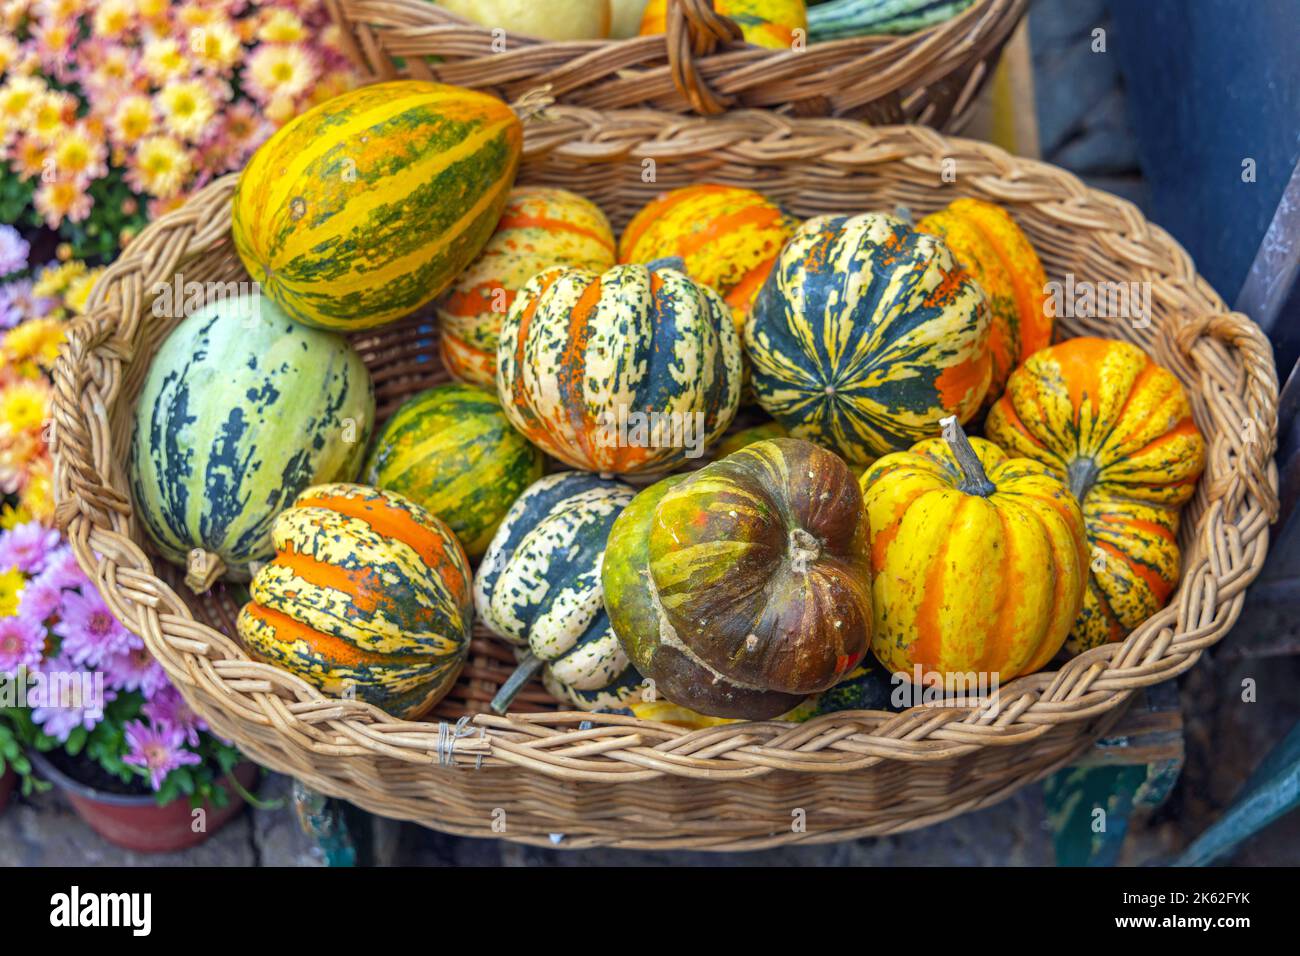 Gourds and Pumpkins in Oval Rattan Basket October Autumn Stock Photo